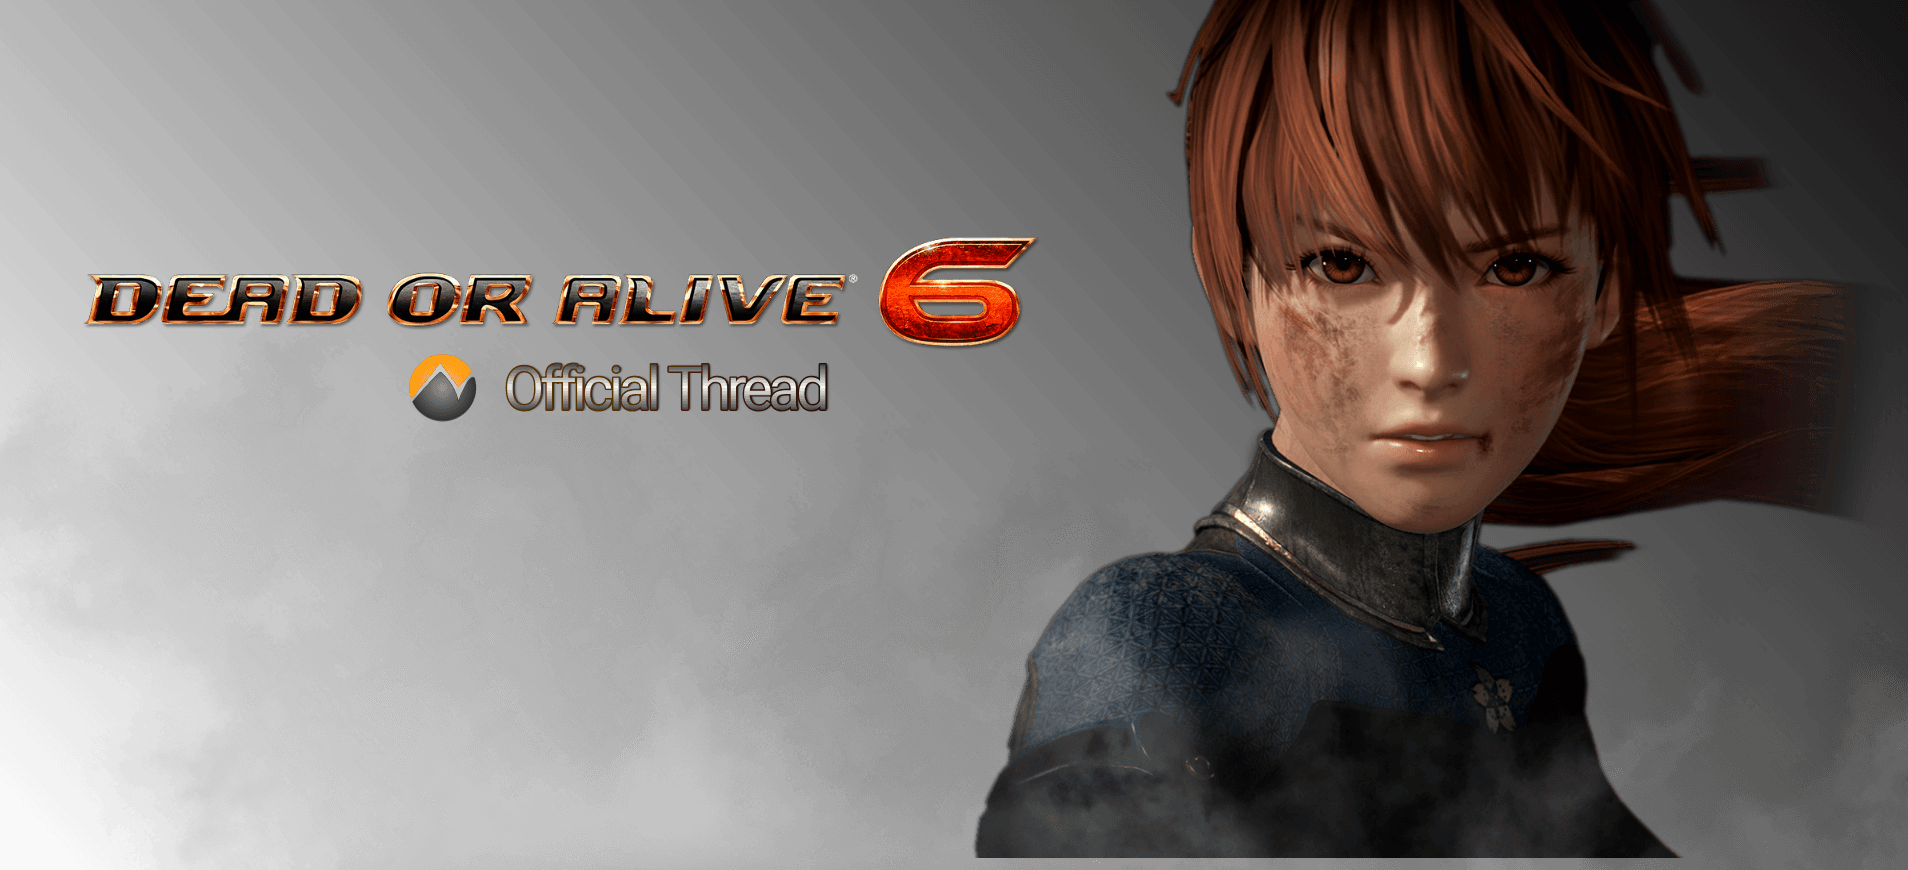 Dead or Alive 6 PC Version Full Game Free Download